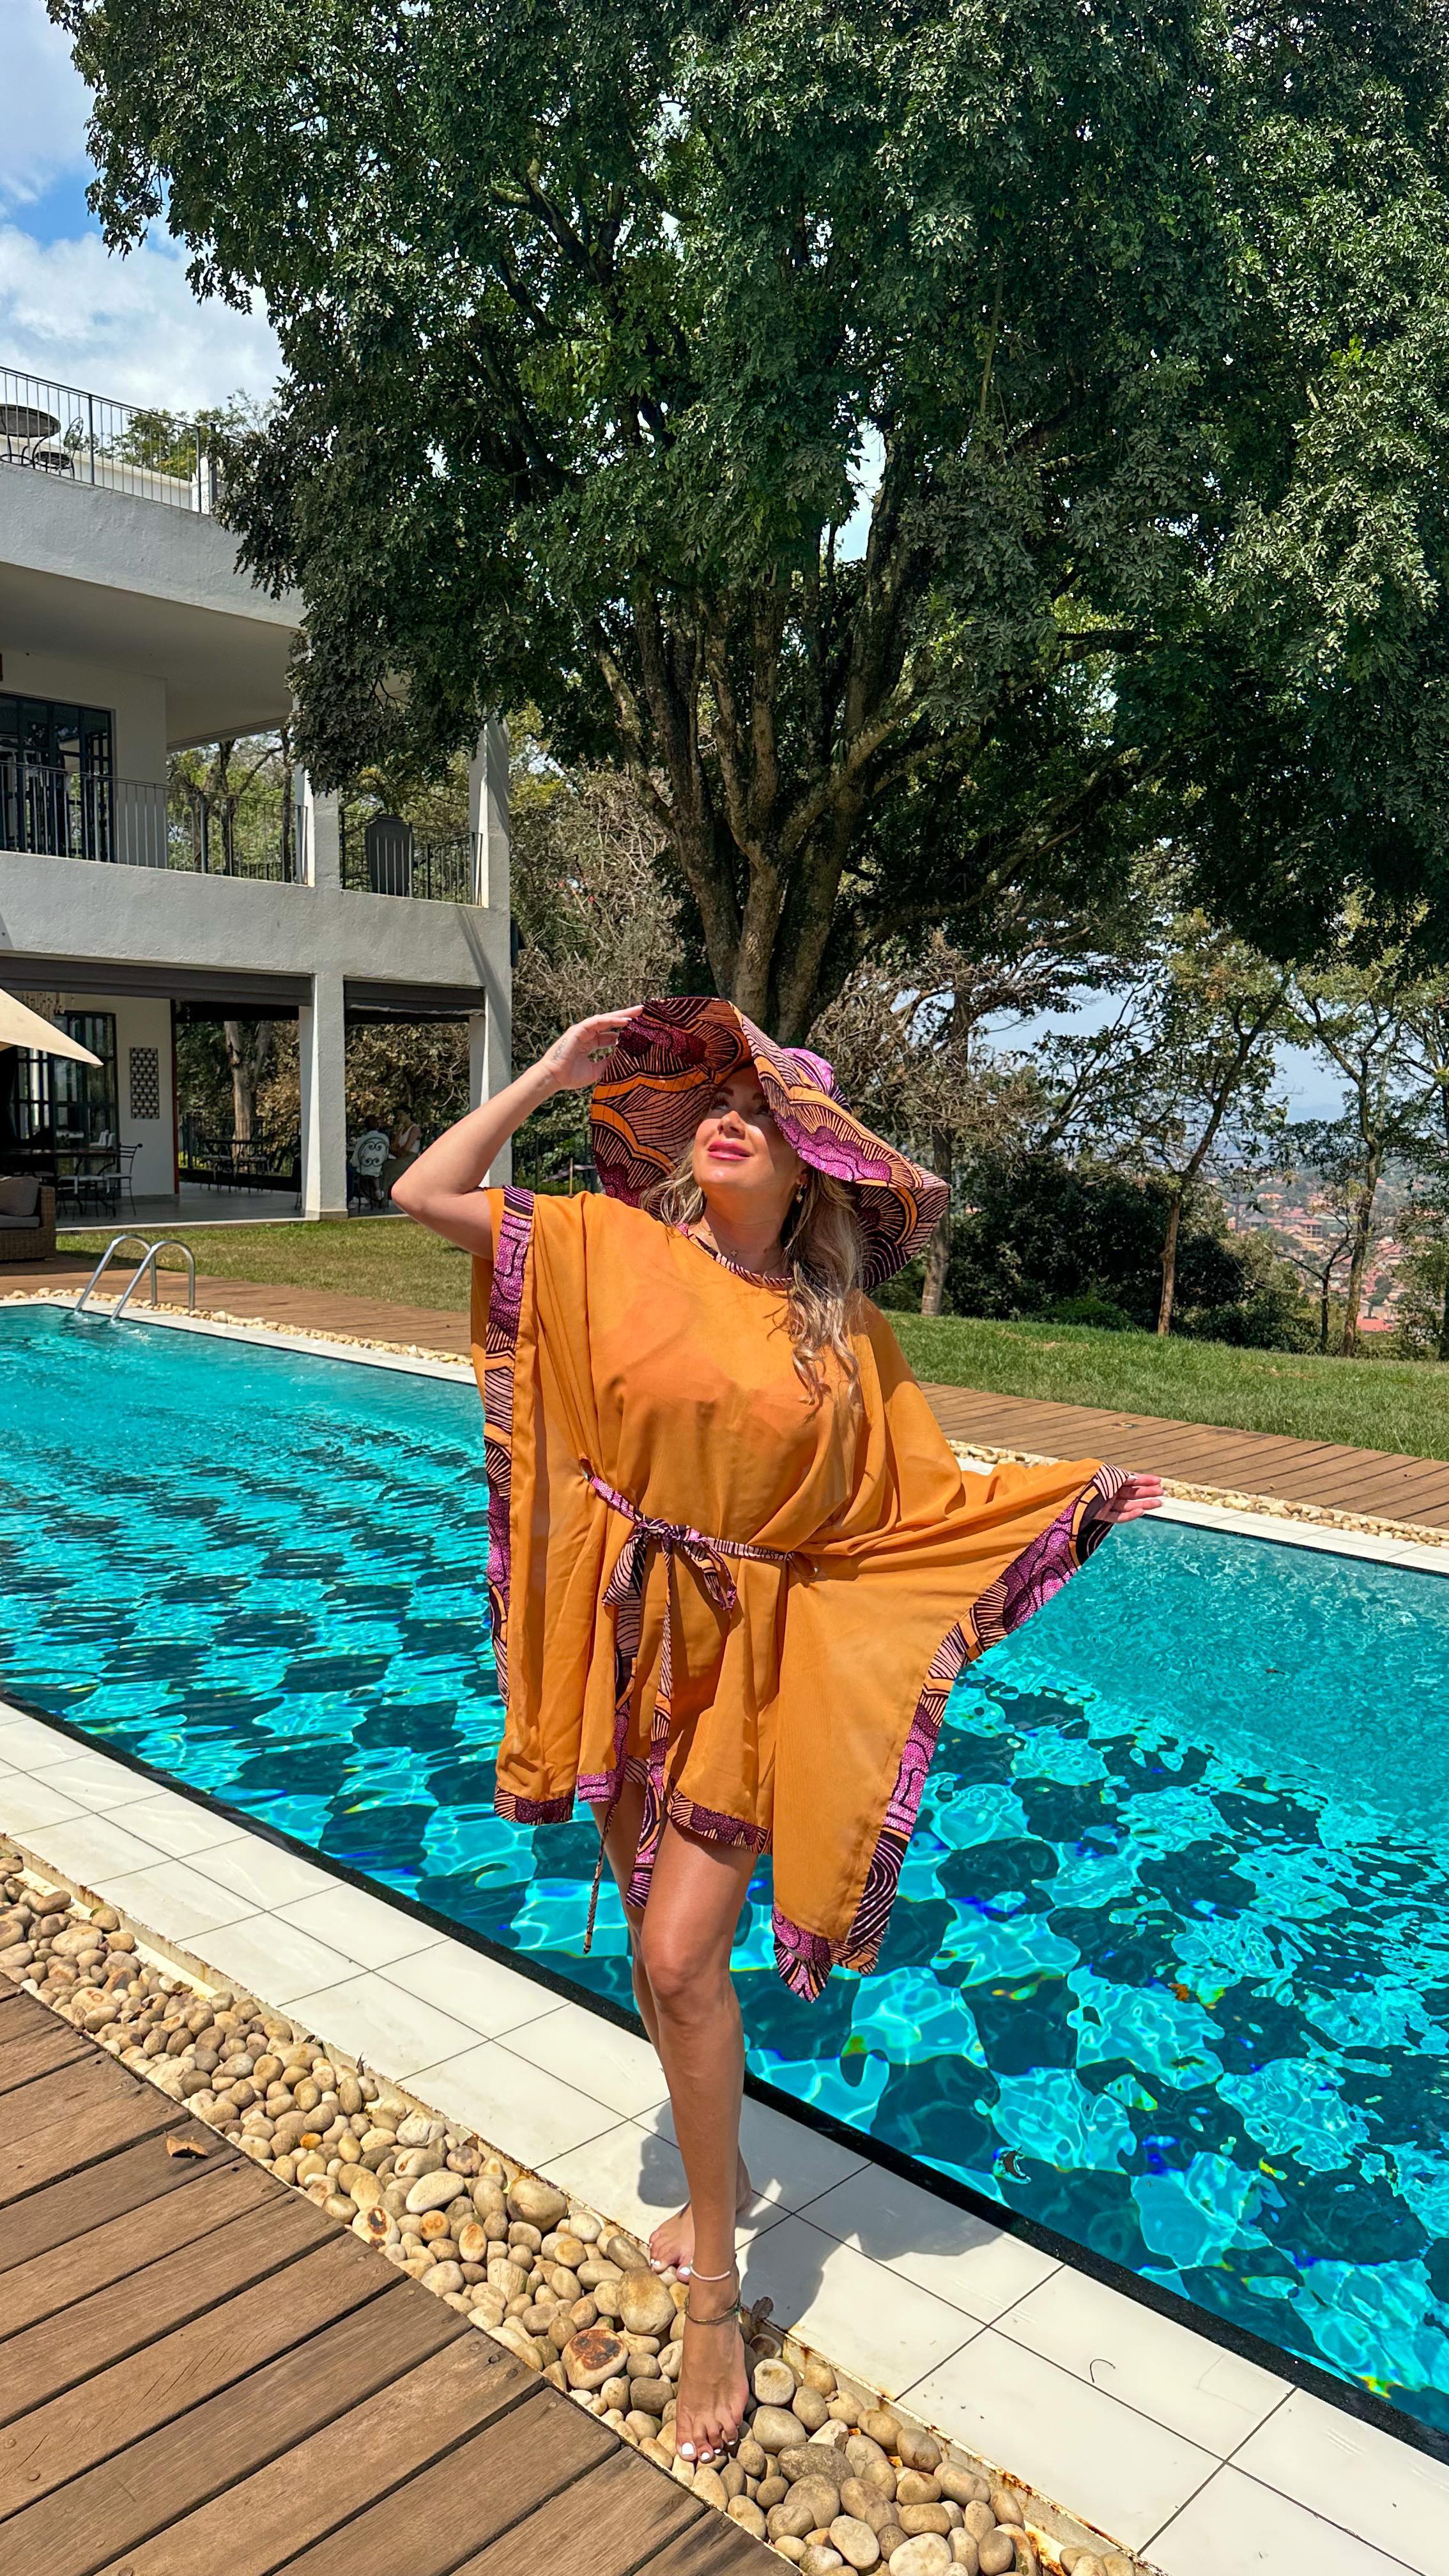 The most beautiful hotel I’ve stayed at in Uganda, and the most beautiful custom made kitenge fashions! 😻💃

“Kitenge” is the beautiful colorful fabric that women (and some men) wear in East, West, and Central Africa. Many women wear it 正规极速赛车平台✪As a sarong, head wrap, swaddle or sew it into outfits like these! It’s one of my favorite styles in the world! 

I barely packed anything for my 3 week/6 country Africa trip because I designed what I wanted to wear and with which patterns in advance, then Yimba Uganda hand made them and tailored them to my body when I arrived!

Yimba Uganda is an amazing NGO that teaches underprivileged women several job skills and techniques, such 正规极速赛车平台✪As sewing, and then helps them profit from the clothing sales! This is my second year purchasing all of my welcome gift bags from them, my wardrobe, and my group trip gals also all bought items from them!

They were the perfect fabulous pieces to wear at Lattitude 0 hotel, which got a unanimous 😻 from our group!

We’re about to head across the country to Bwindi to do our gorilla trek, so I’ll write up a blog post for Uganda on the long drive!

Is Uganda on your bucketlist?

#uganda #kampala #kitenge #kitengefashion #lattitude0degrees #yimbauganda #yimbafashion #mylifesatravelmovie #besthotels